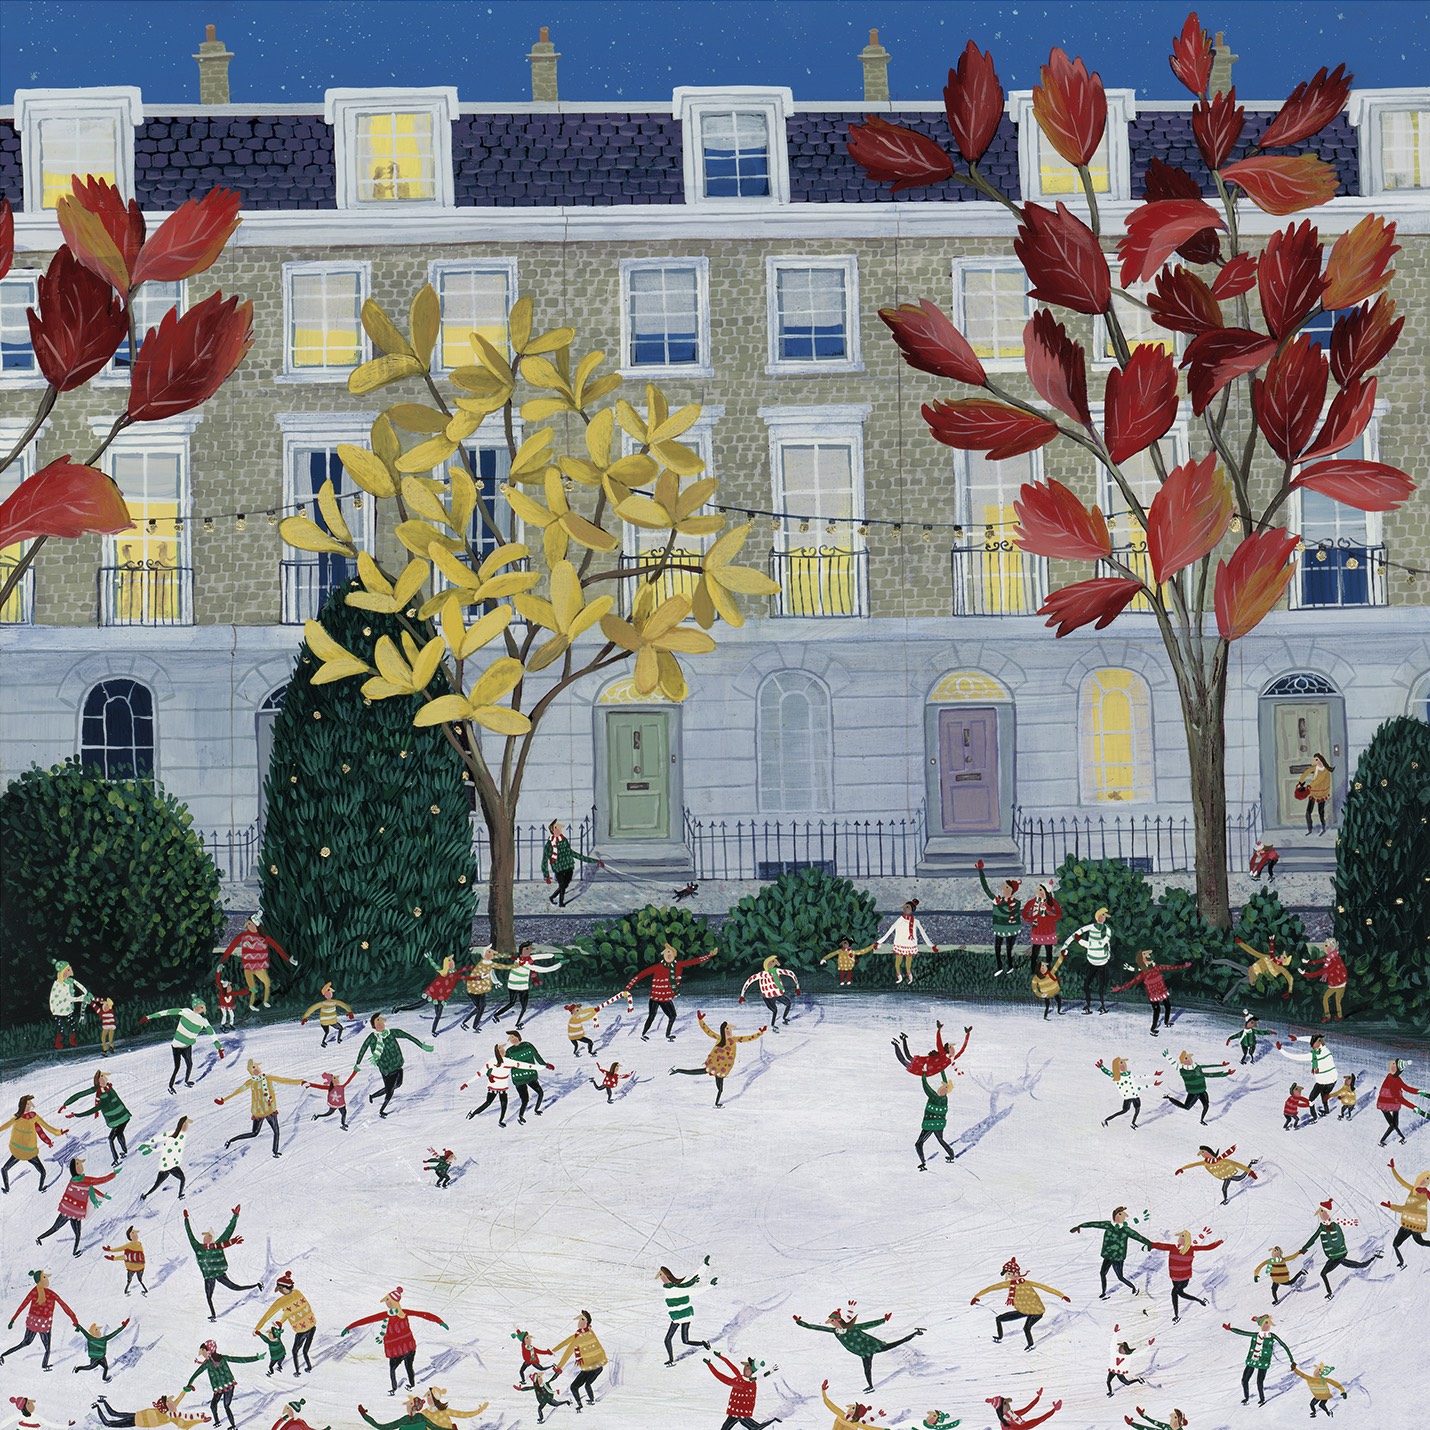 Skating in The Square (Greeting Card)